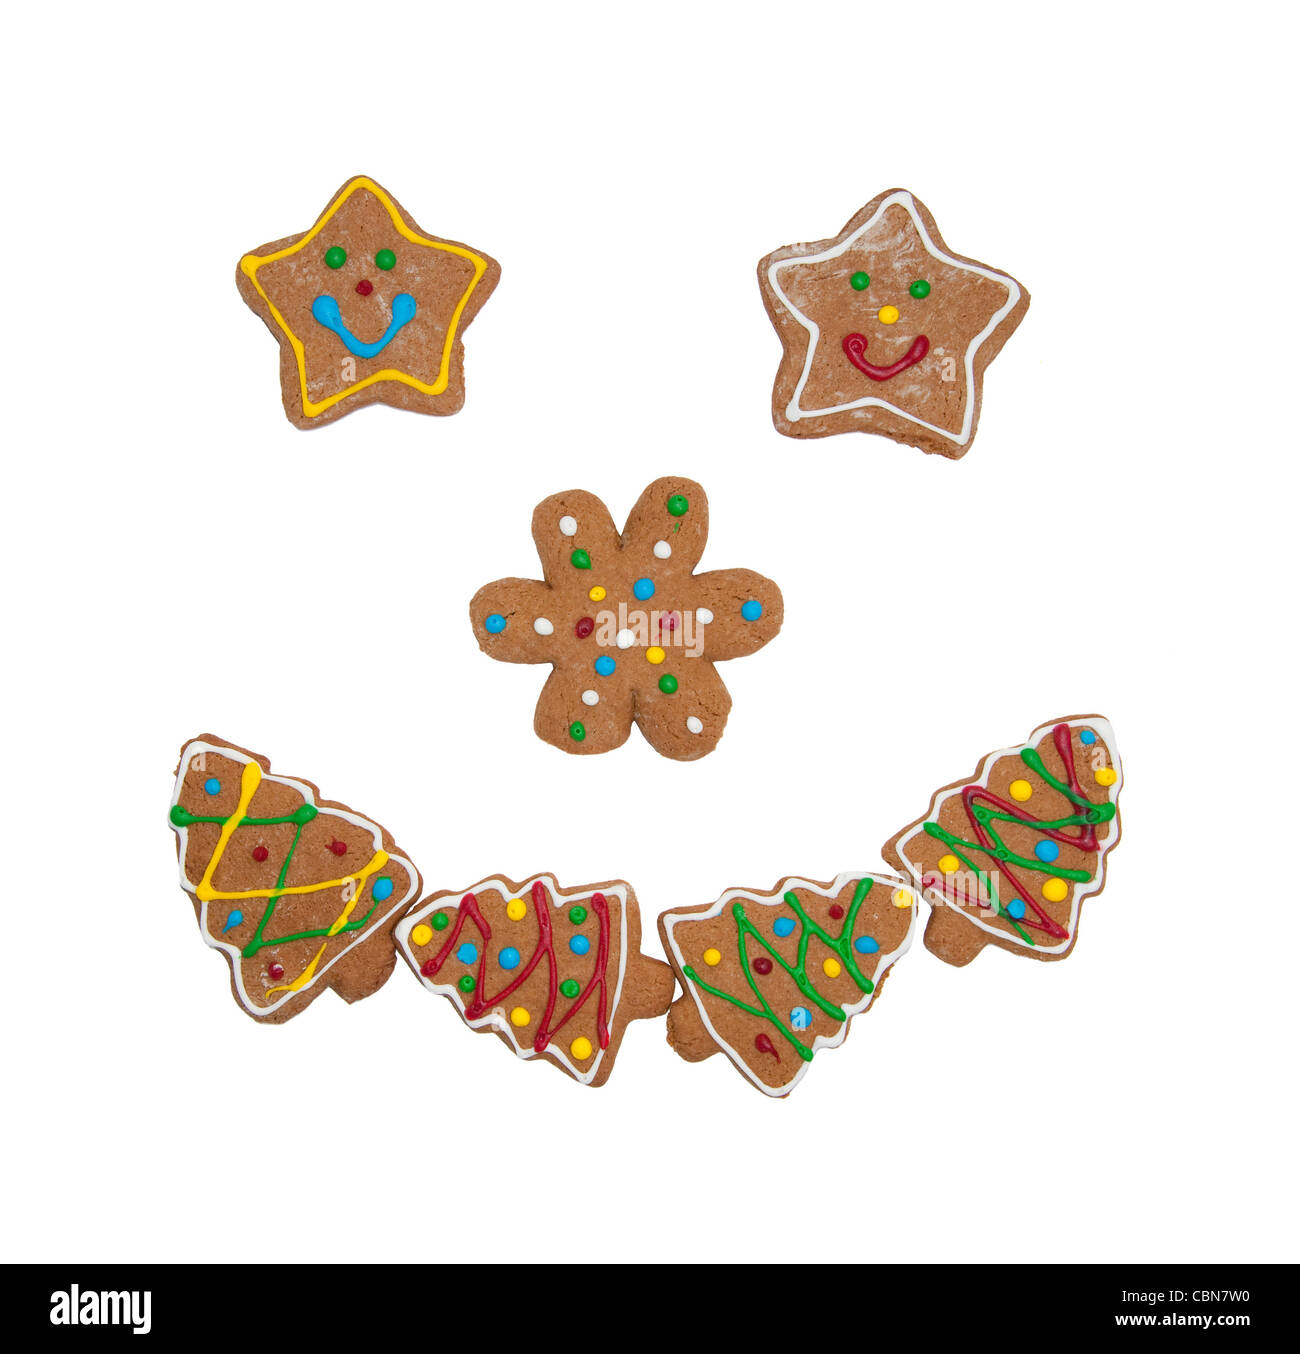 Colorful Christmas cookies forming a smiling face on white background Stock Photo